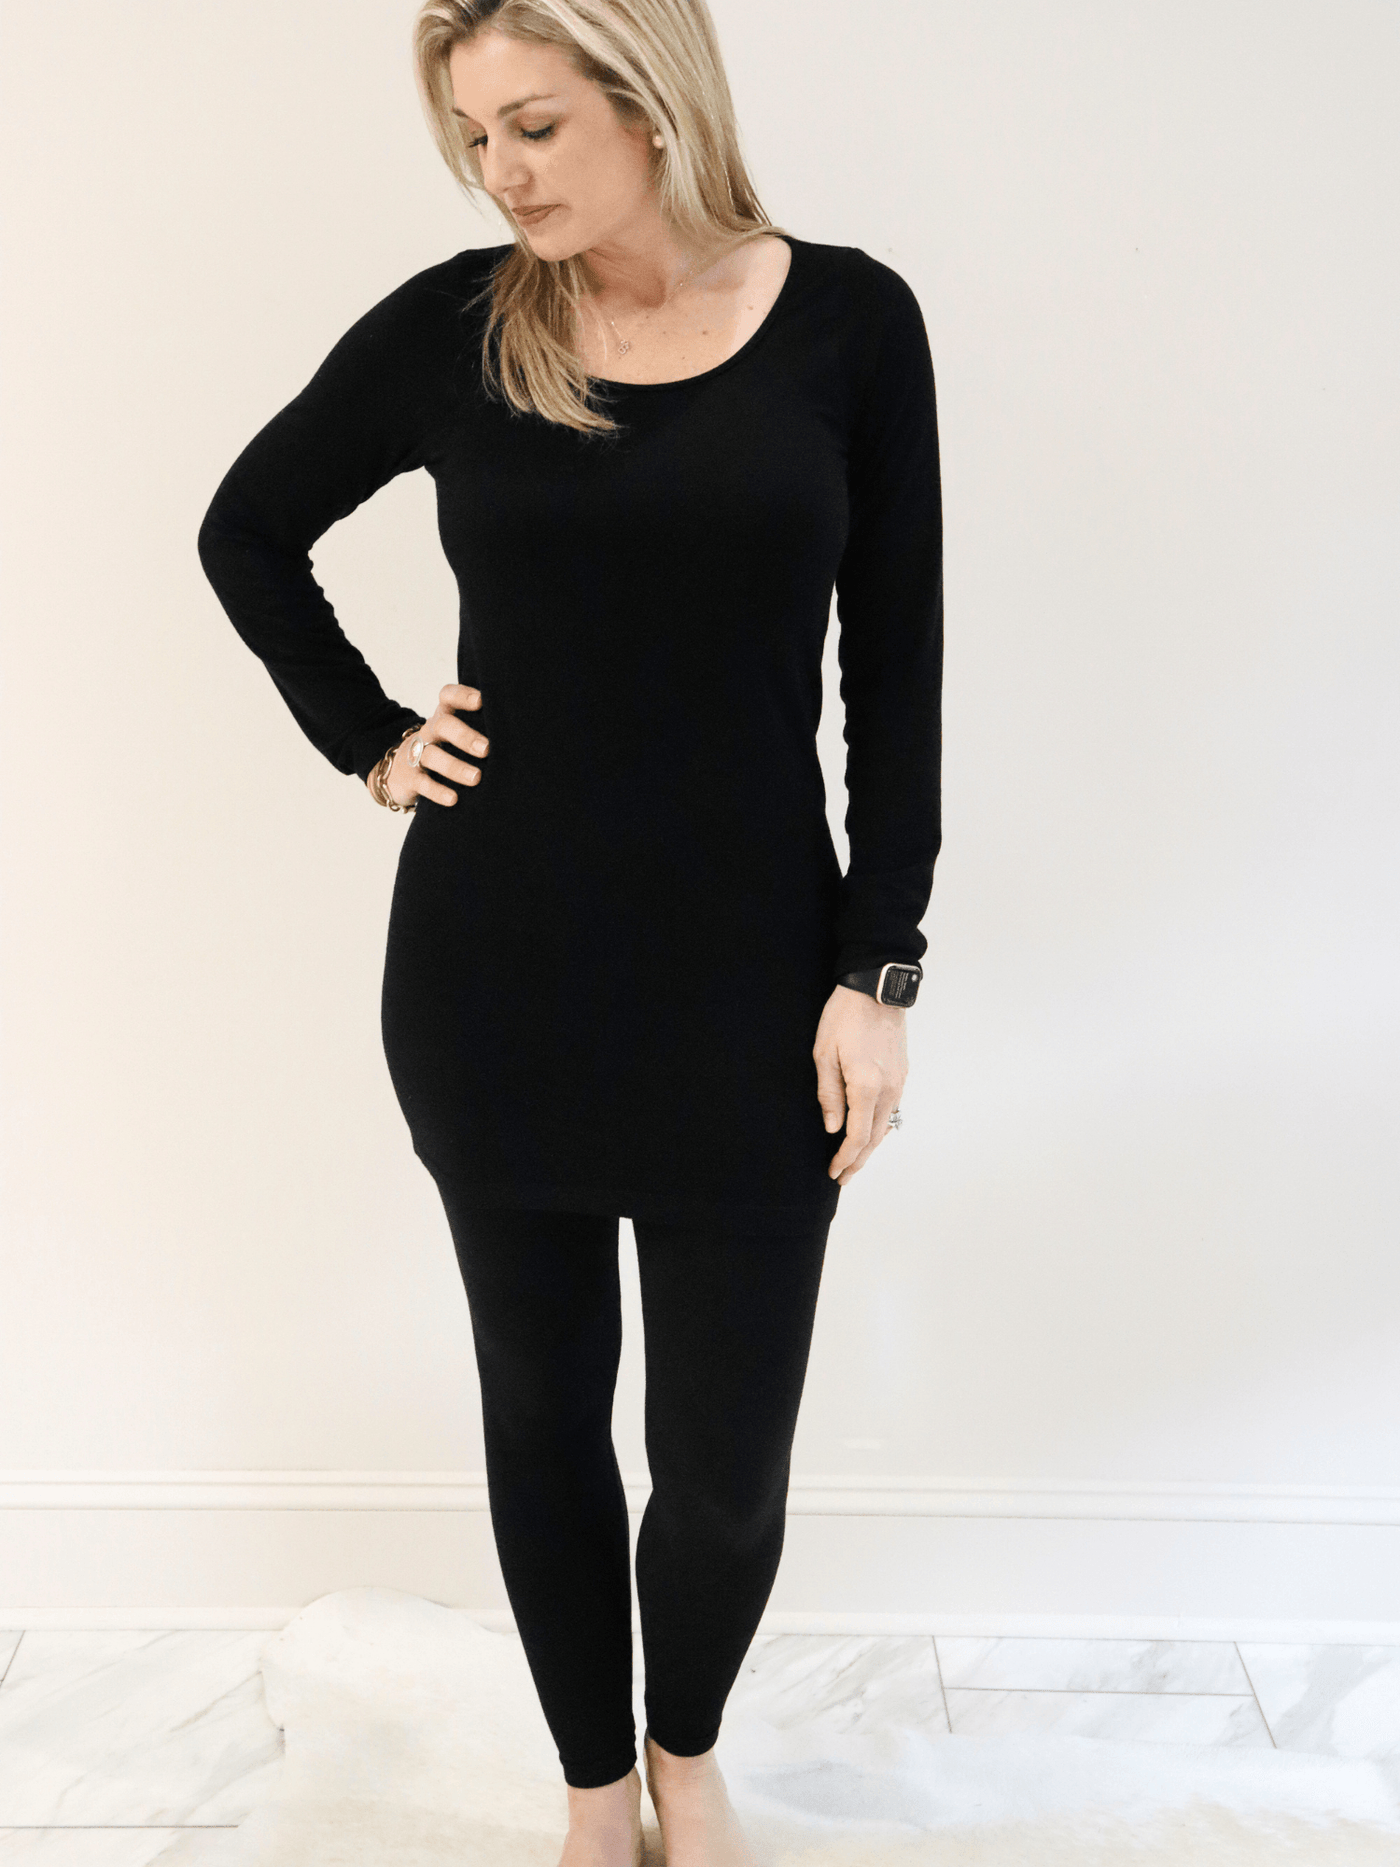 Long Sleeve Layering Top black front view.